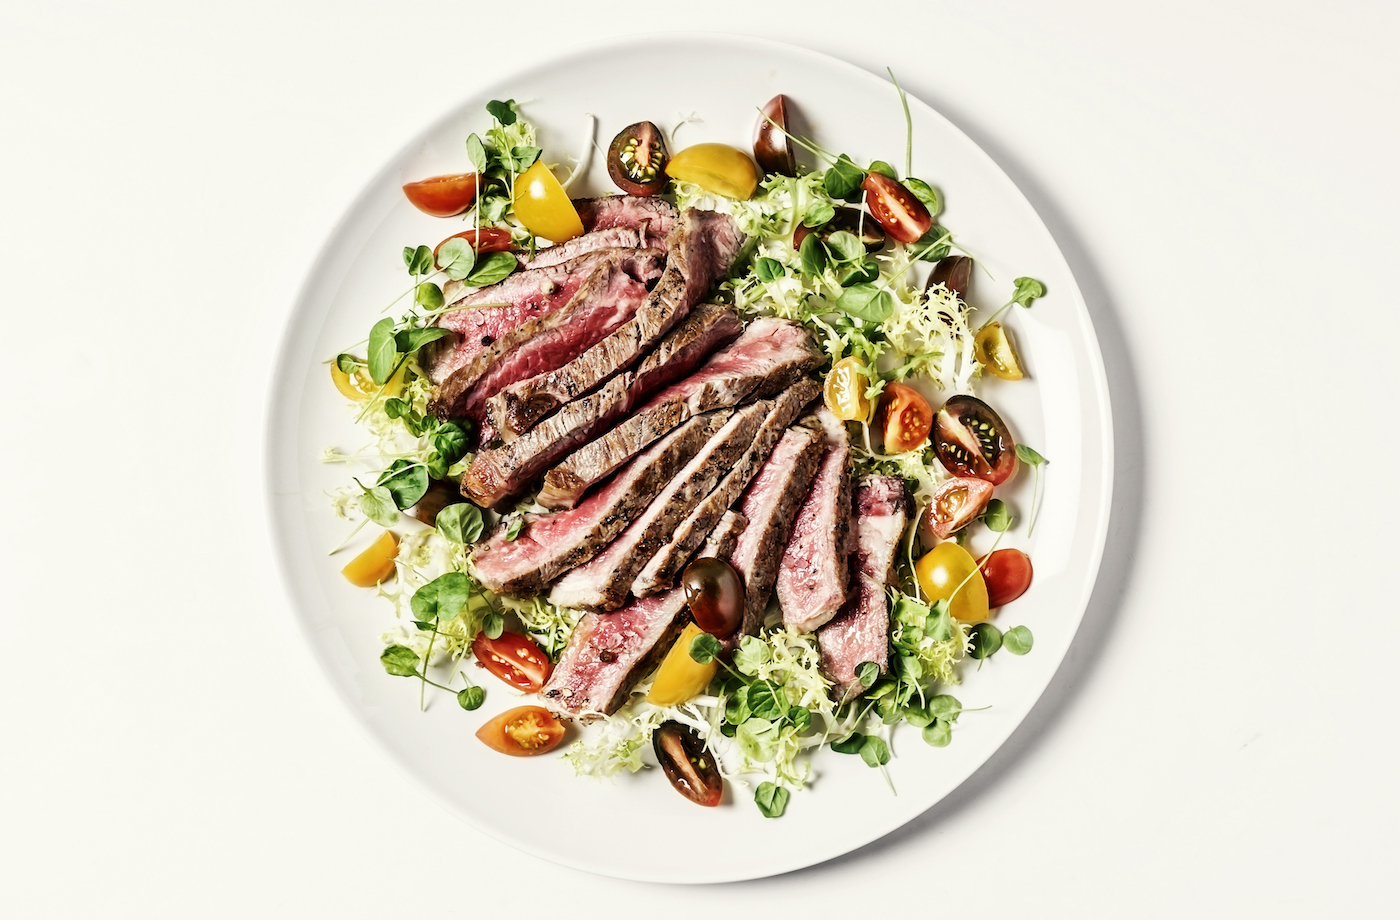 paleo diet macros steak salad with lettuce and tomatoes on a plate